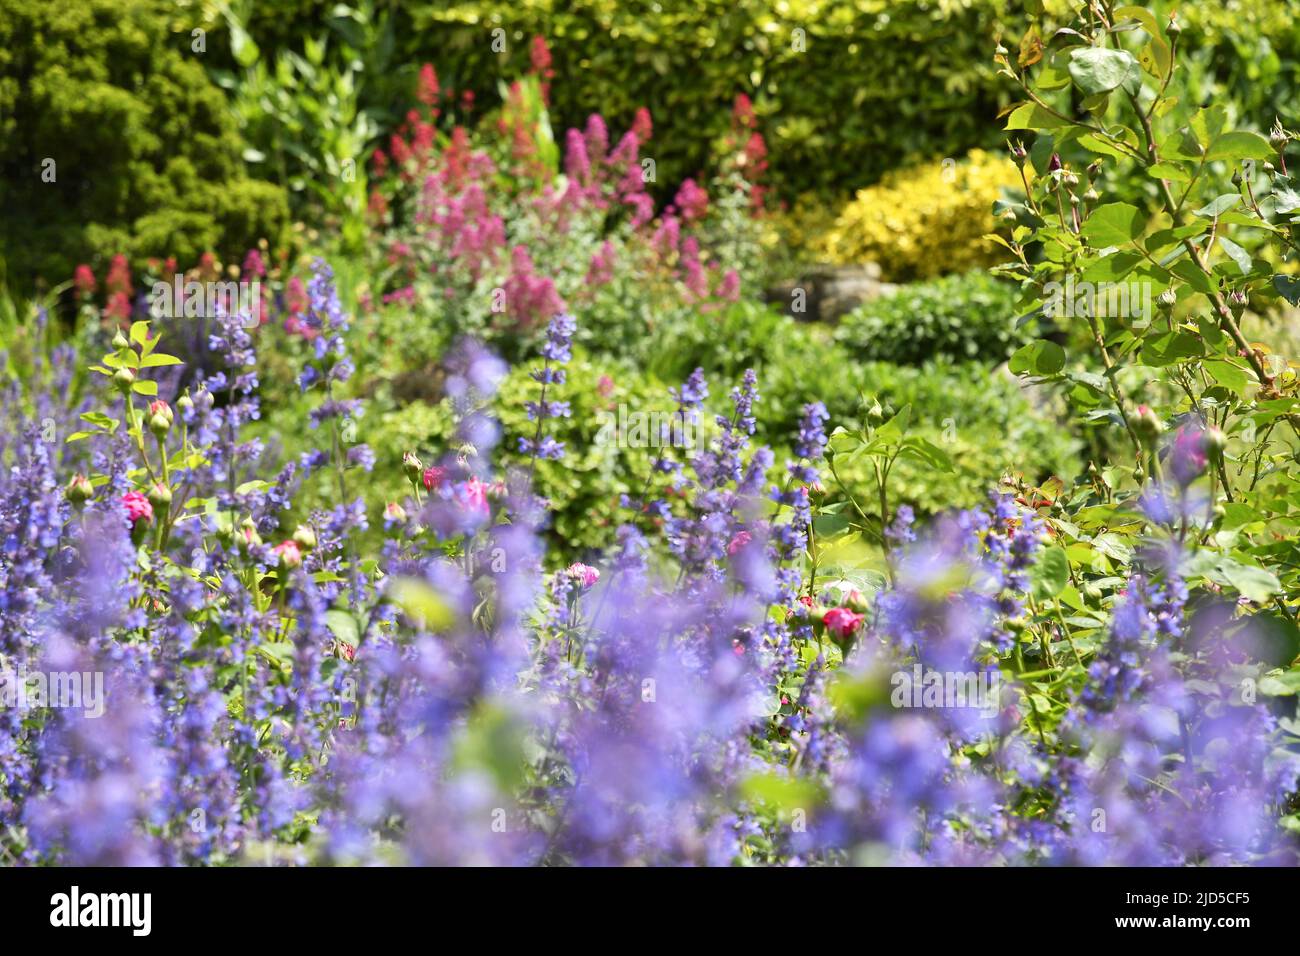 Lavender and rose flower beds in Richmond Terrace Gardens London UK. Stock Photo